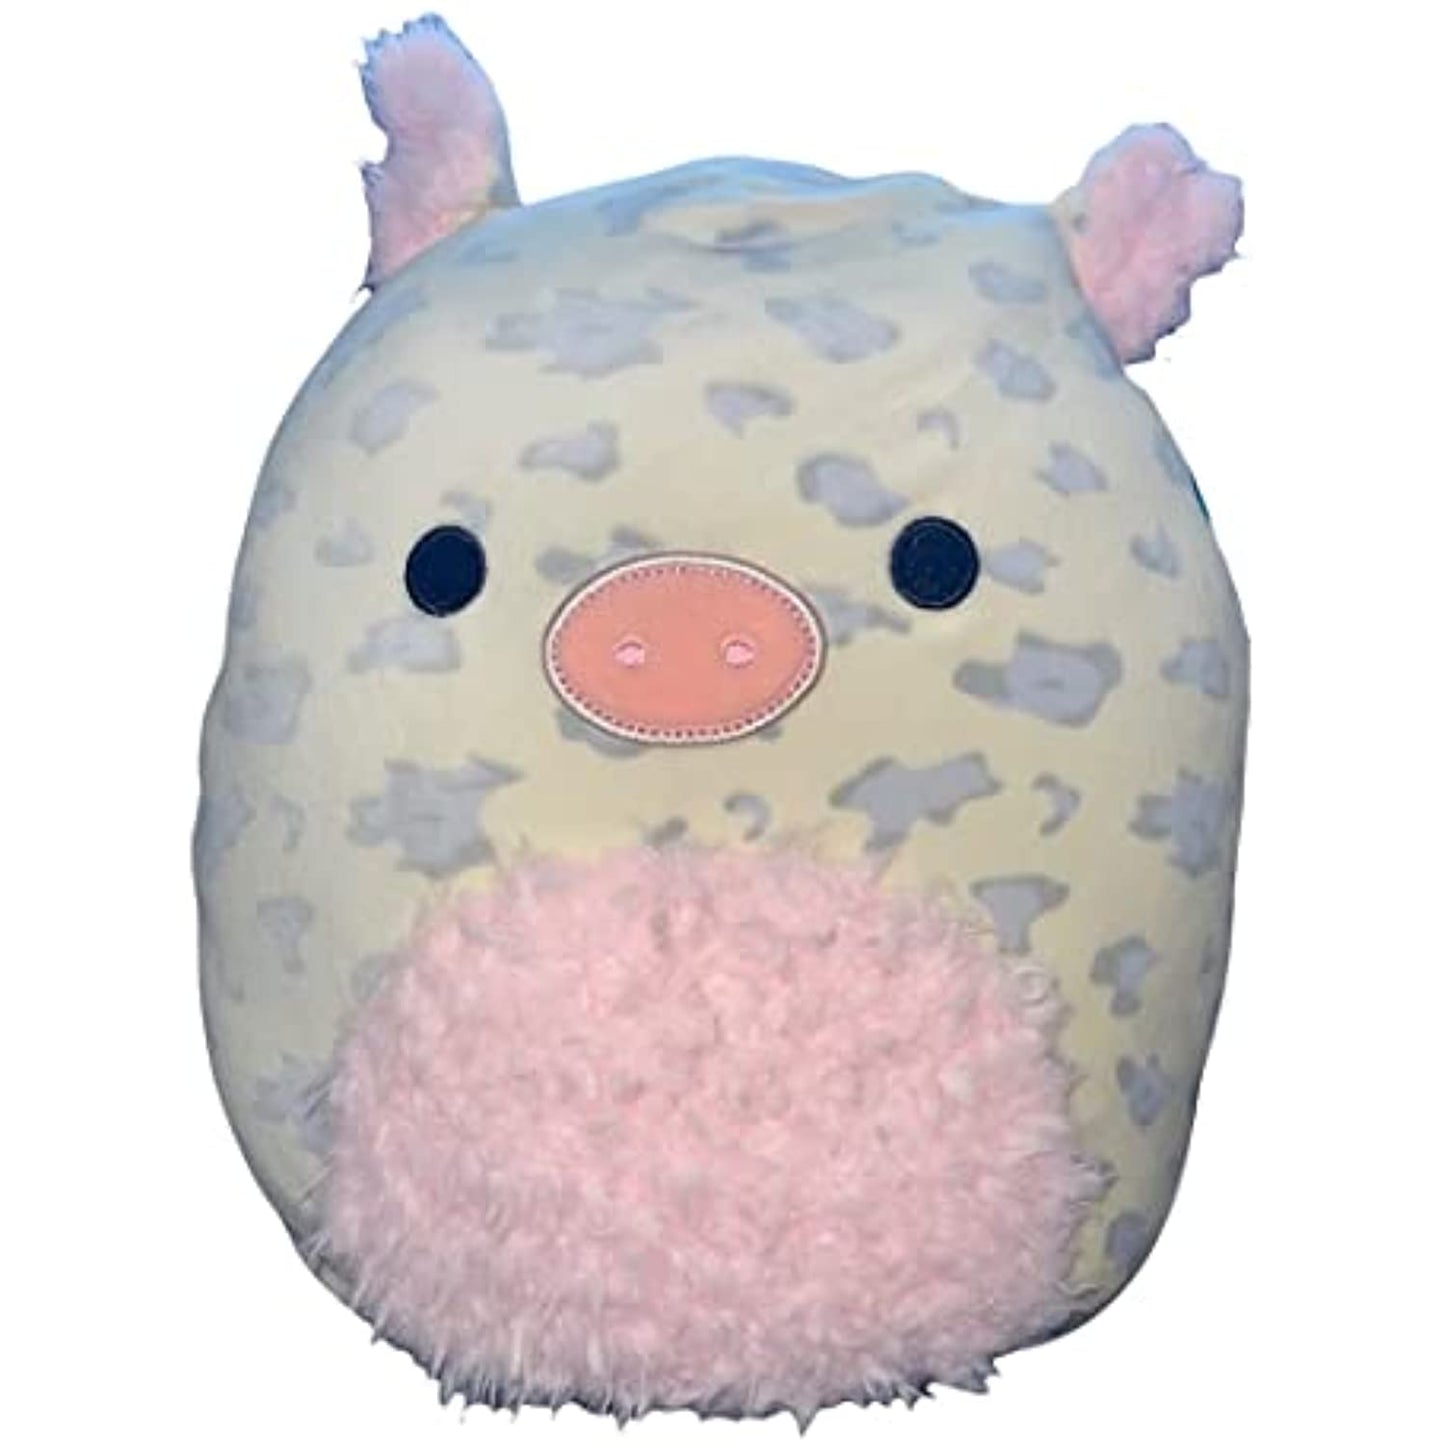 Squishmallows Rosie the Pig with Pink Fuzzy Belly 11" Plush Stuffed Animal